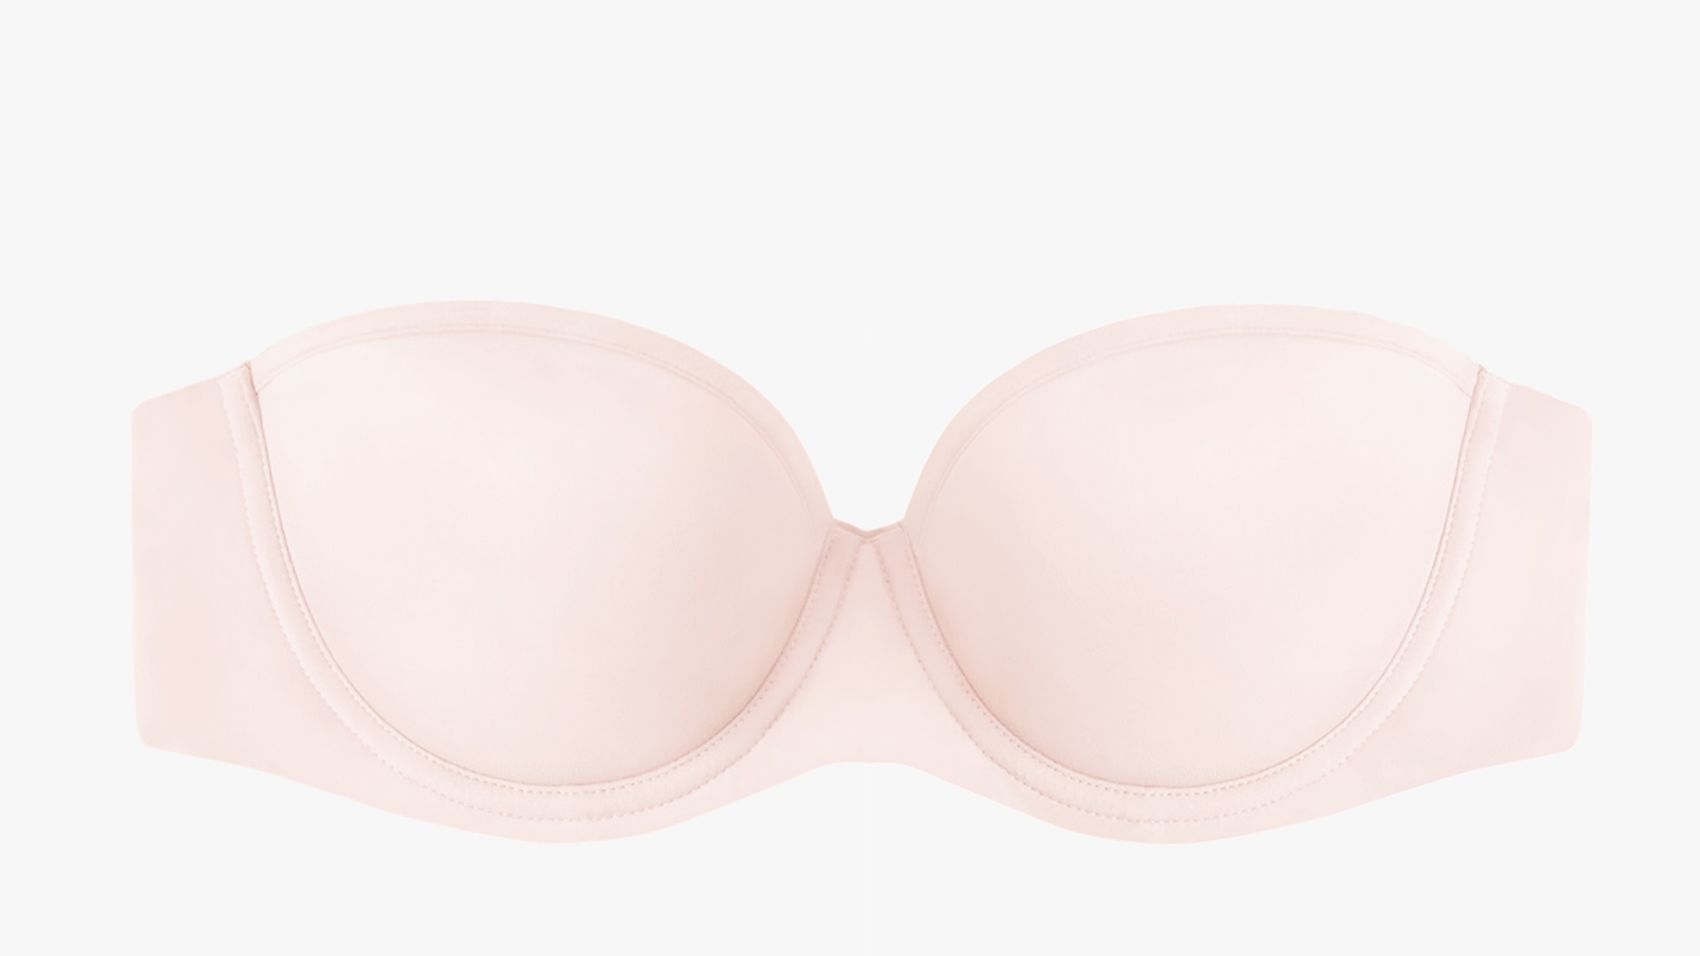 ThirdLove Bra Fit & Size Quiz - Online Bra Fitting To Discover Your Perfect  Bra Size